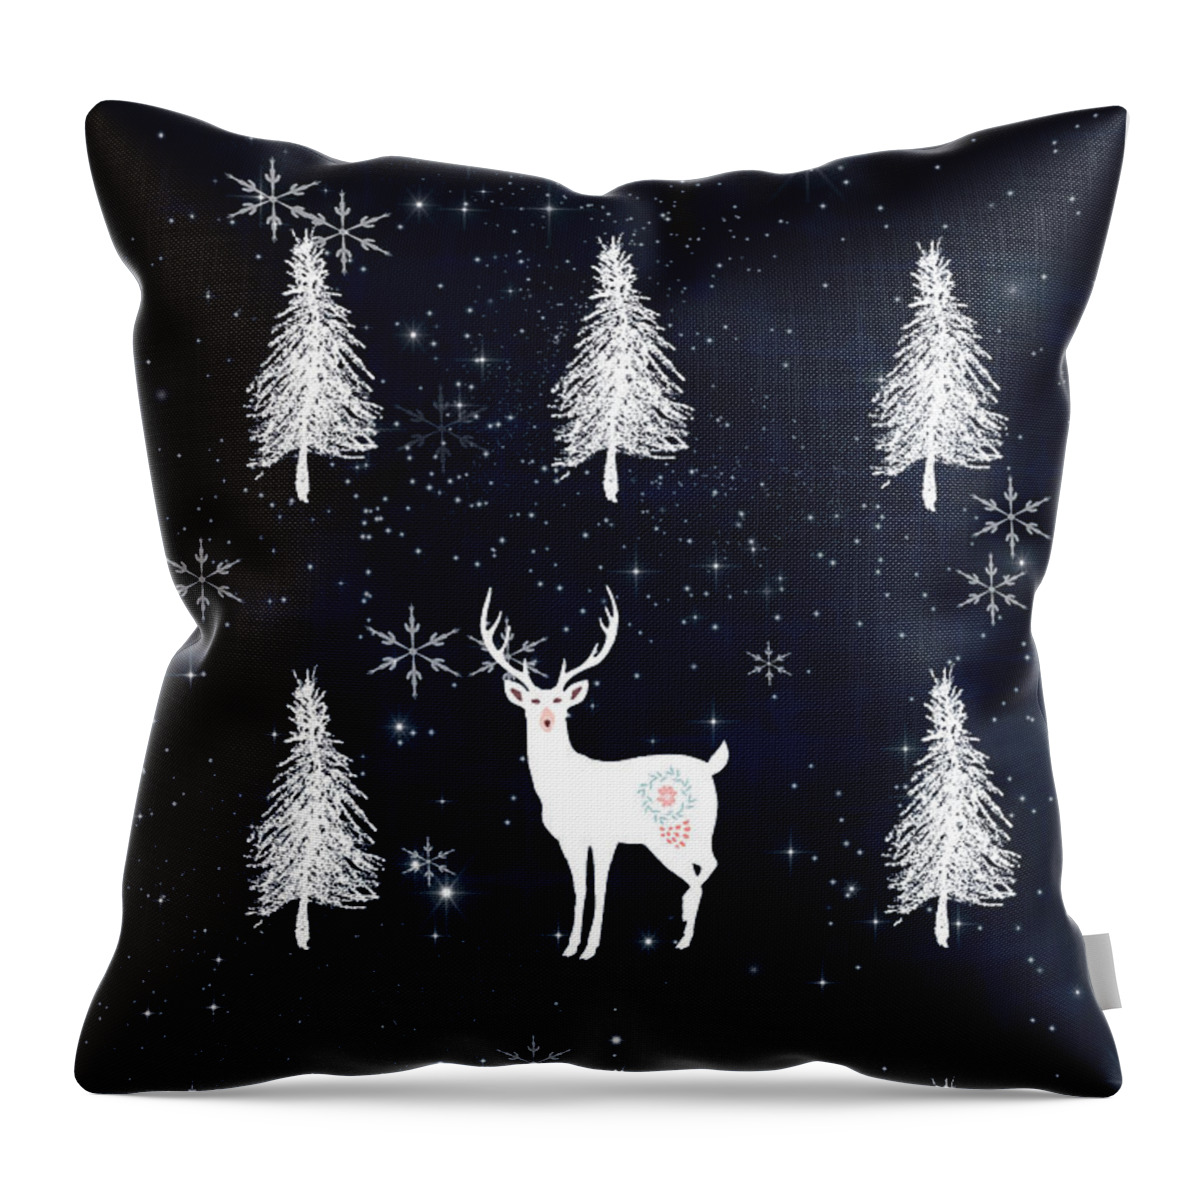 Star Throw Pillow featuring the mixed media Christmas Eve - White Stag by Amanda Jane